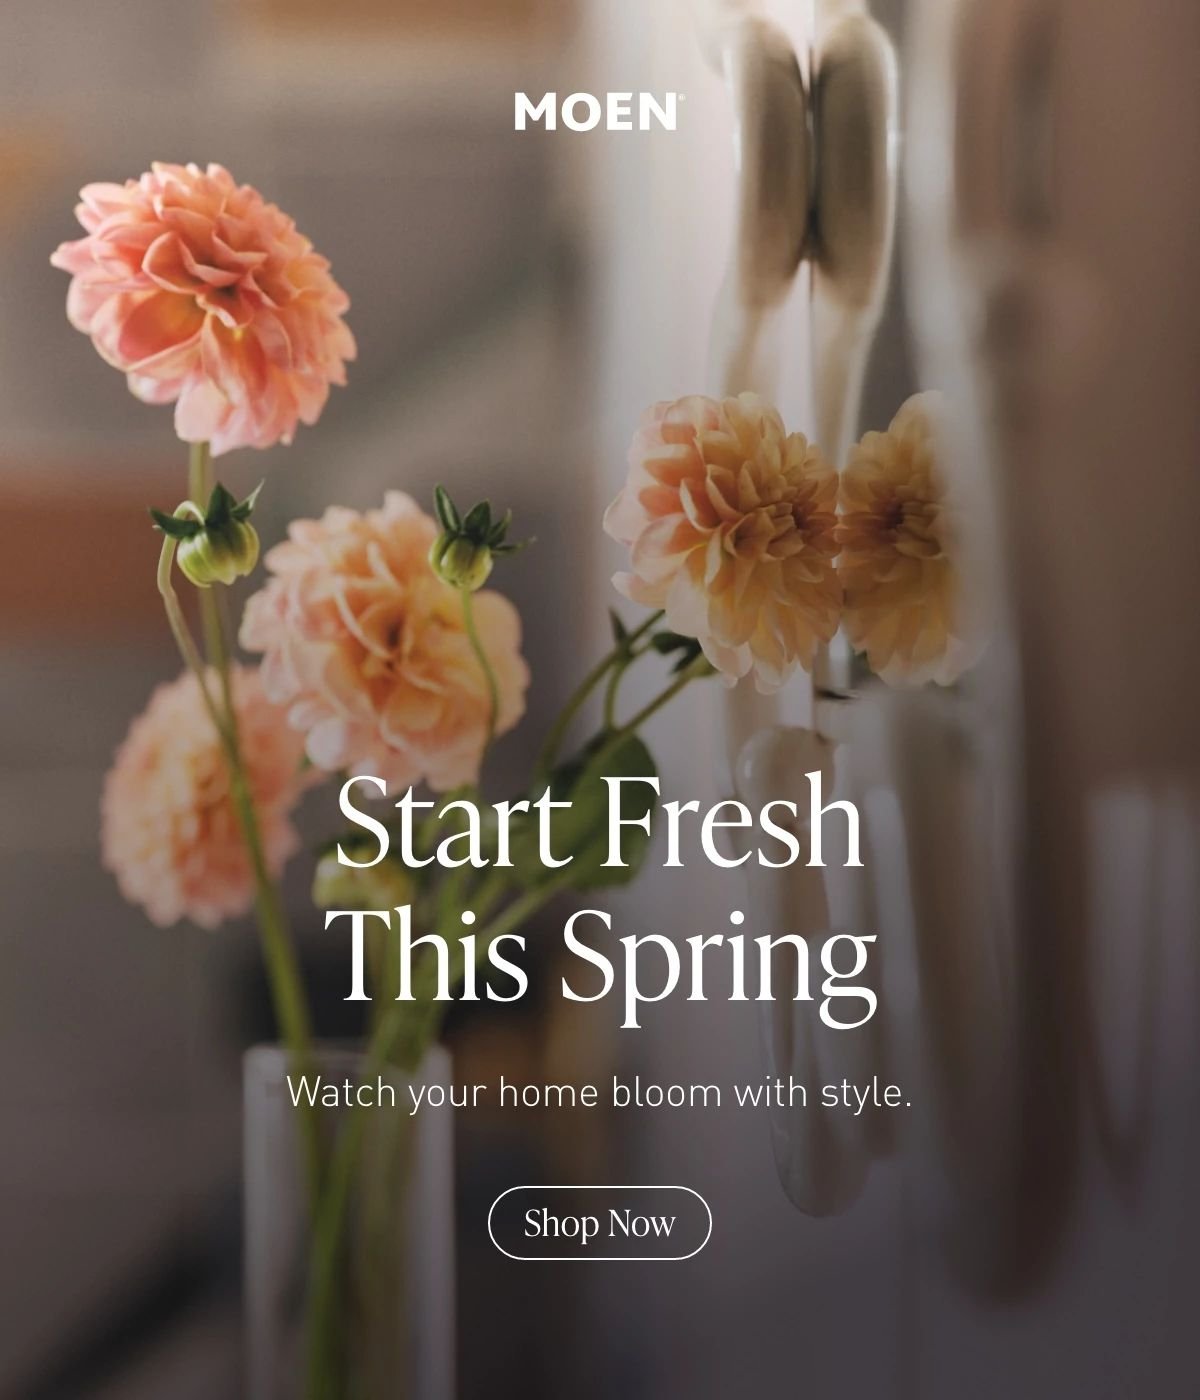 Moen | Start Fresh This Spring. Watch your home bloom with style. Shop Now